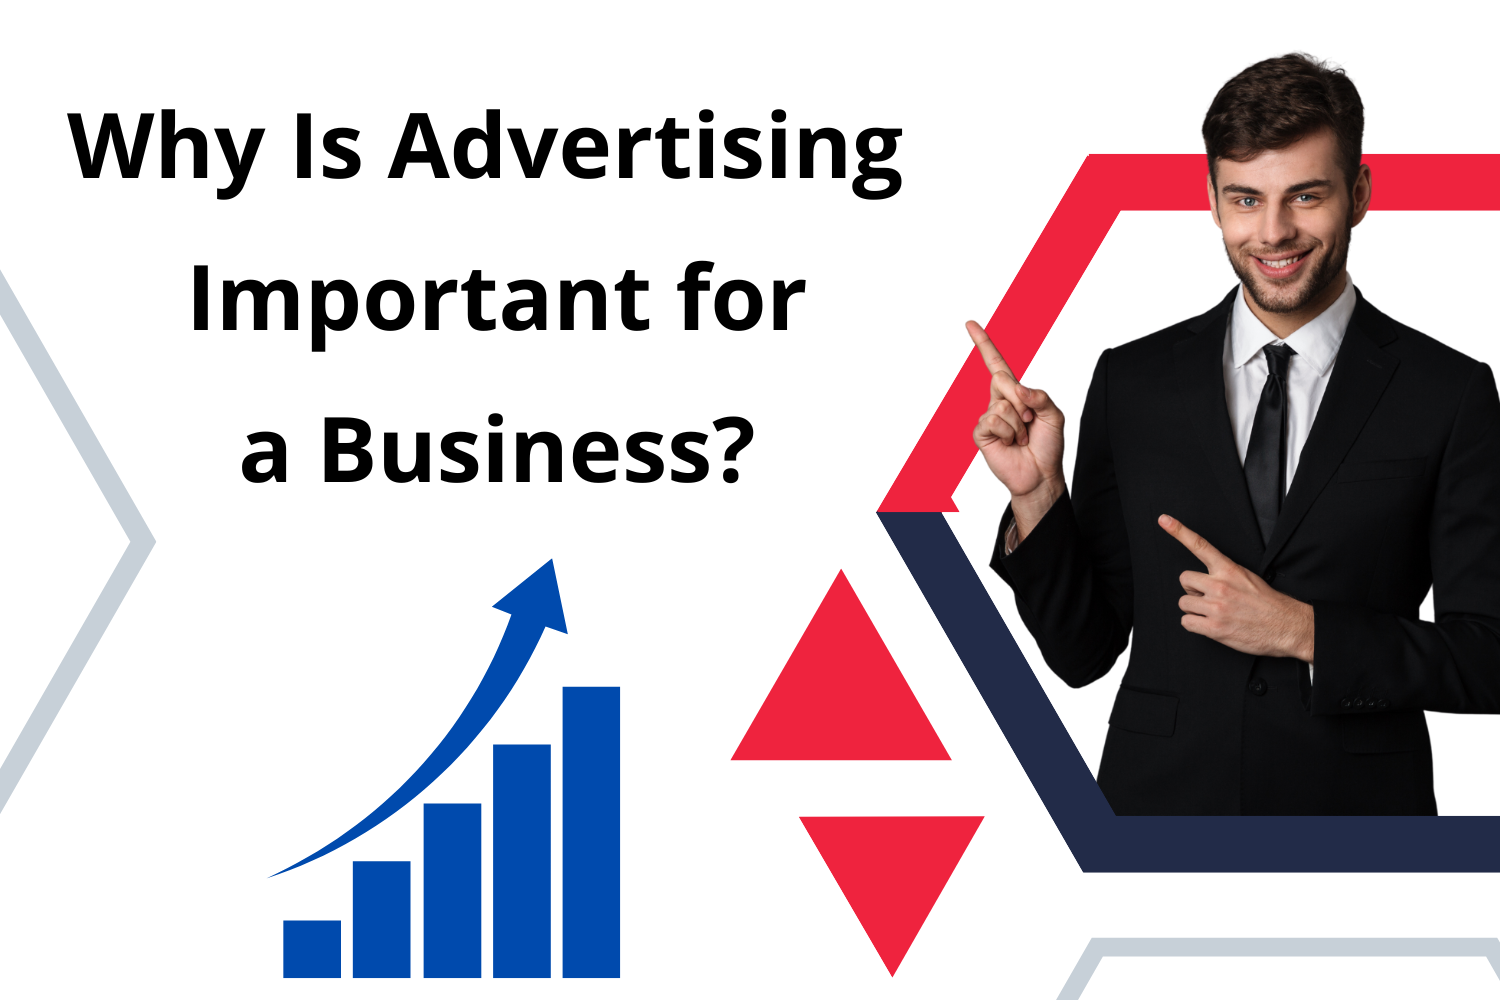 Why Is Advertising Important for a Business